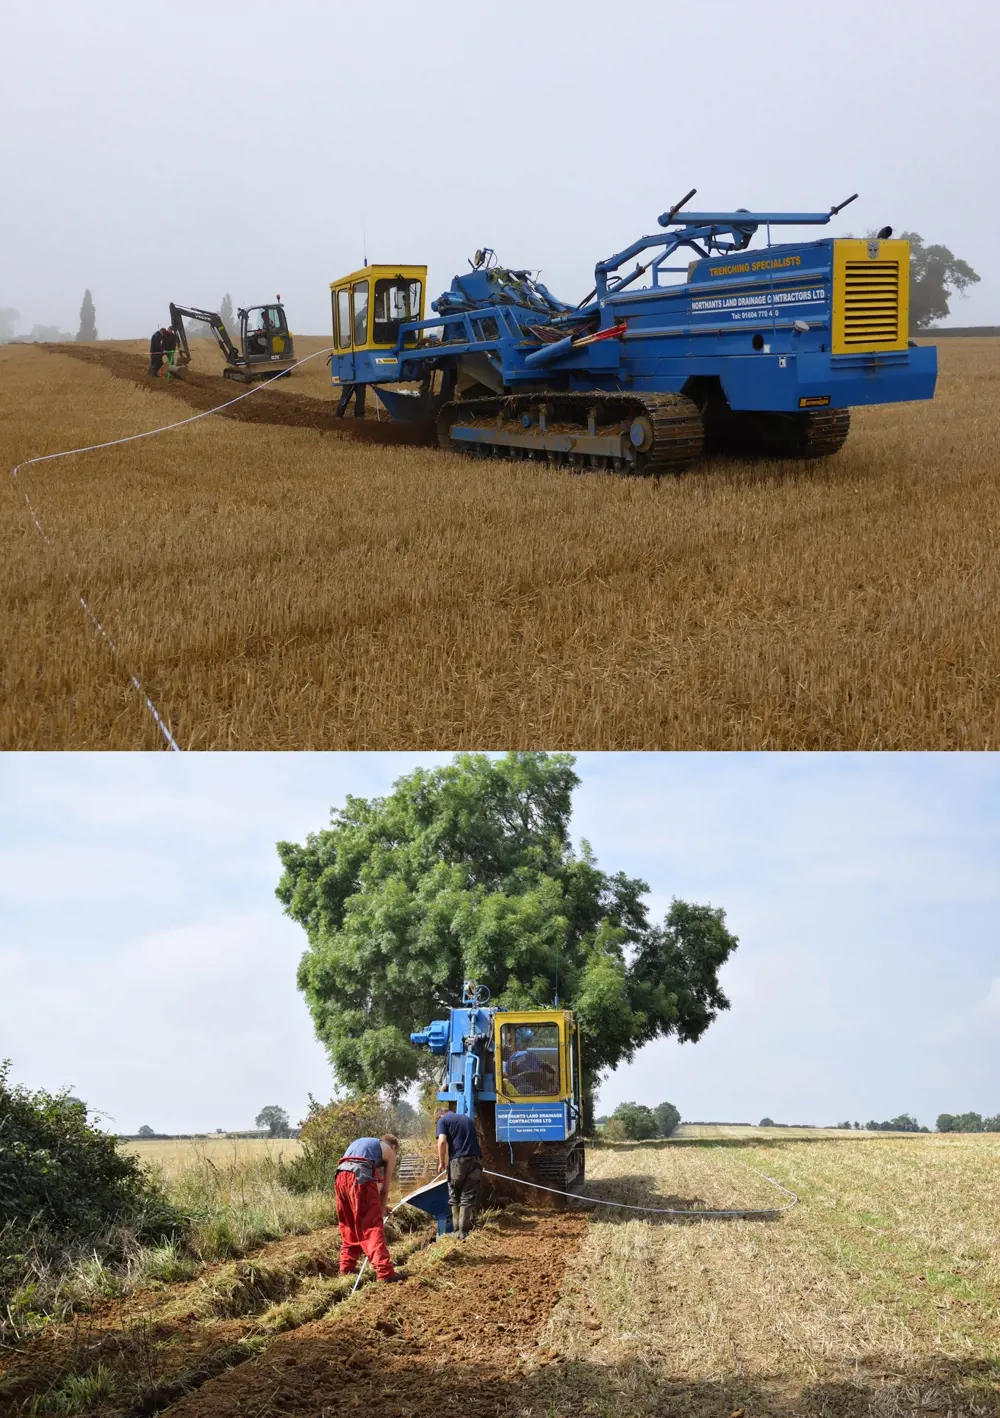 A tractor in a field of crops (top). Volunteers and a digger installing a fibre-optic cable in a field in Abthorpe (bottom).